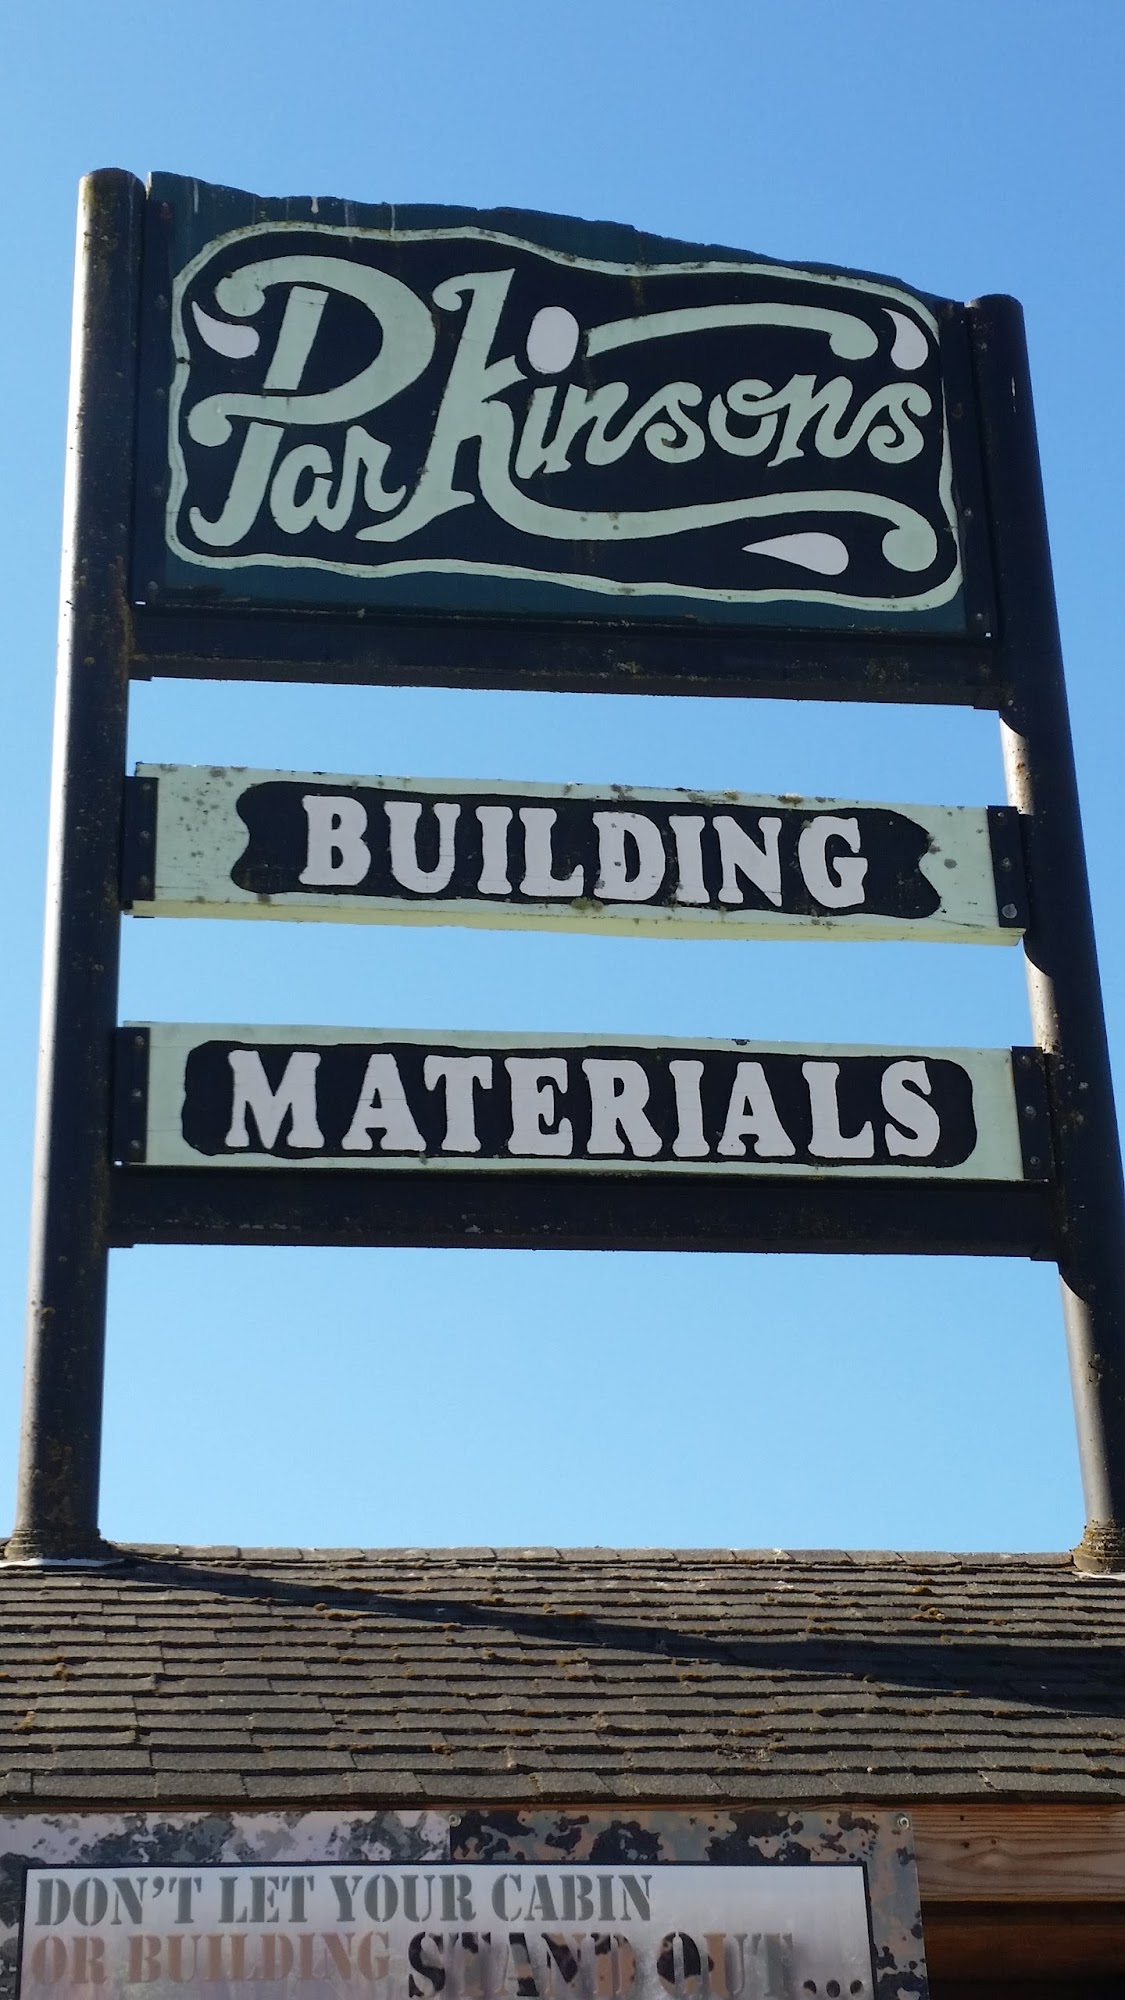 Parkinsons Building Materials 514 Empire Ave, Redway California 95560